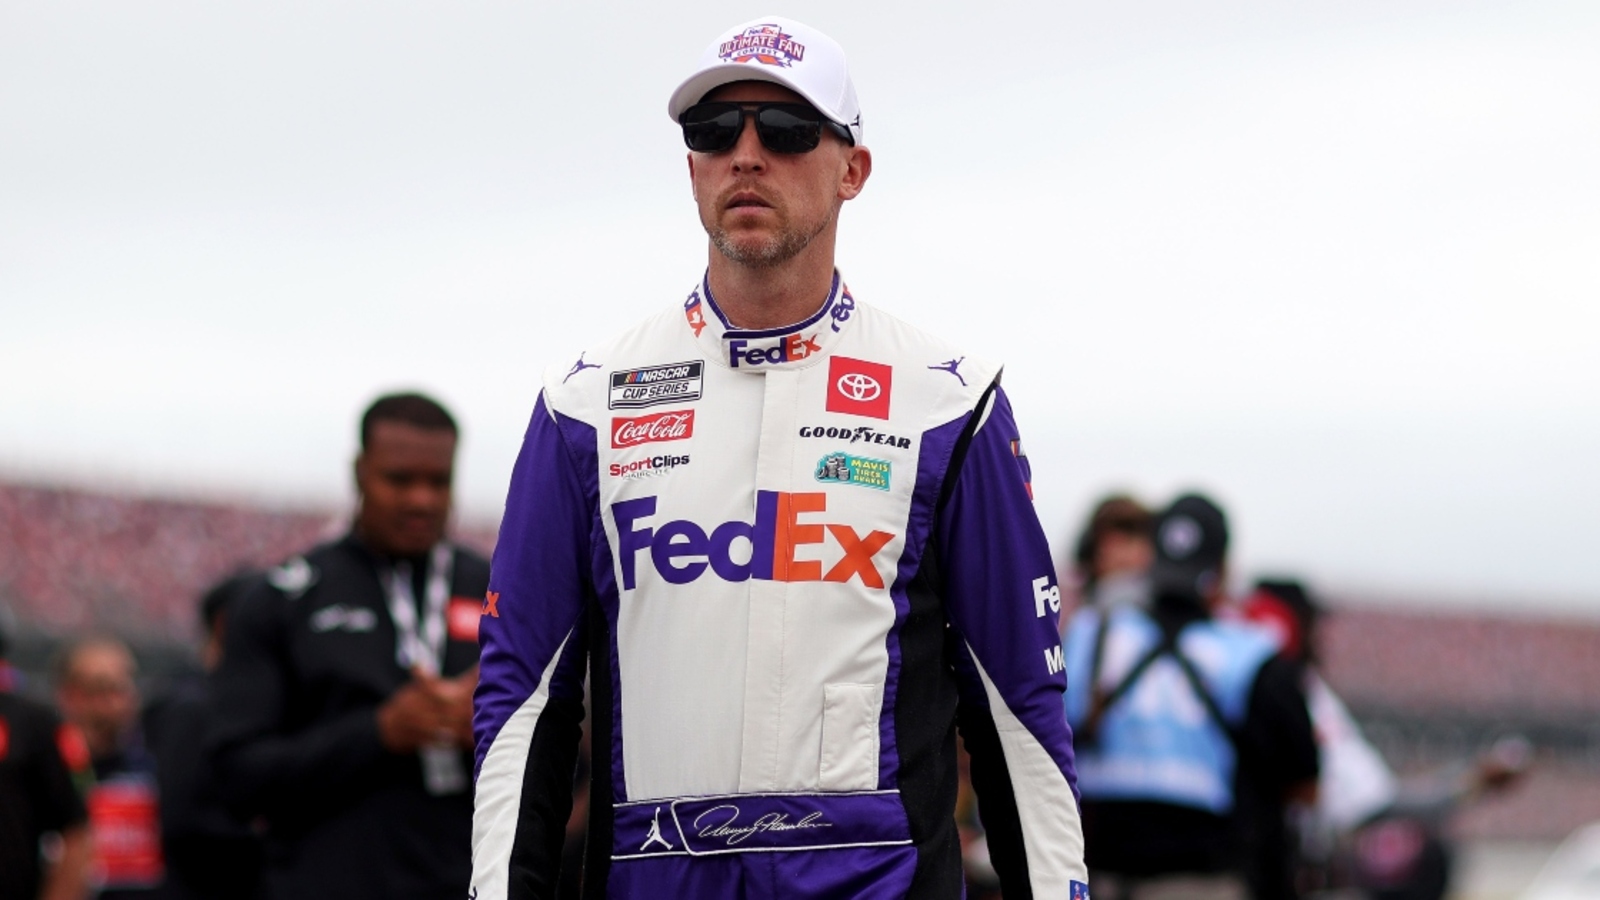 Denny Hamlin spins entering pit road, claims he hit a puddle